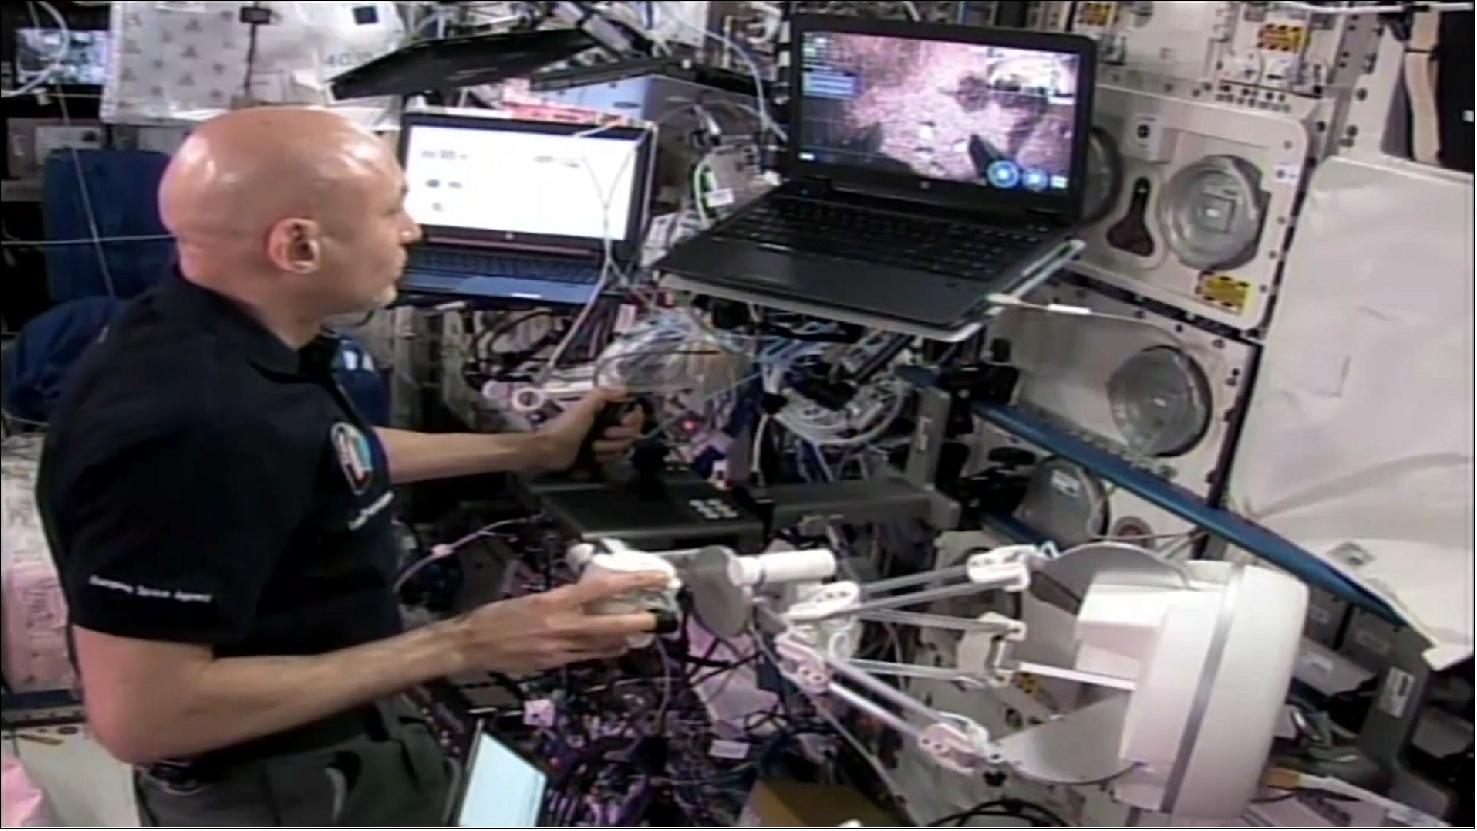 Figure 2: Astronaut Luca Parmitano operated a rover with a 6 degrees of freedom arm from the International Space Station during the Analog-1 test campaign in November 2019 (image credit: ESA-NASA)